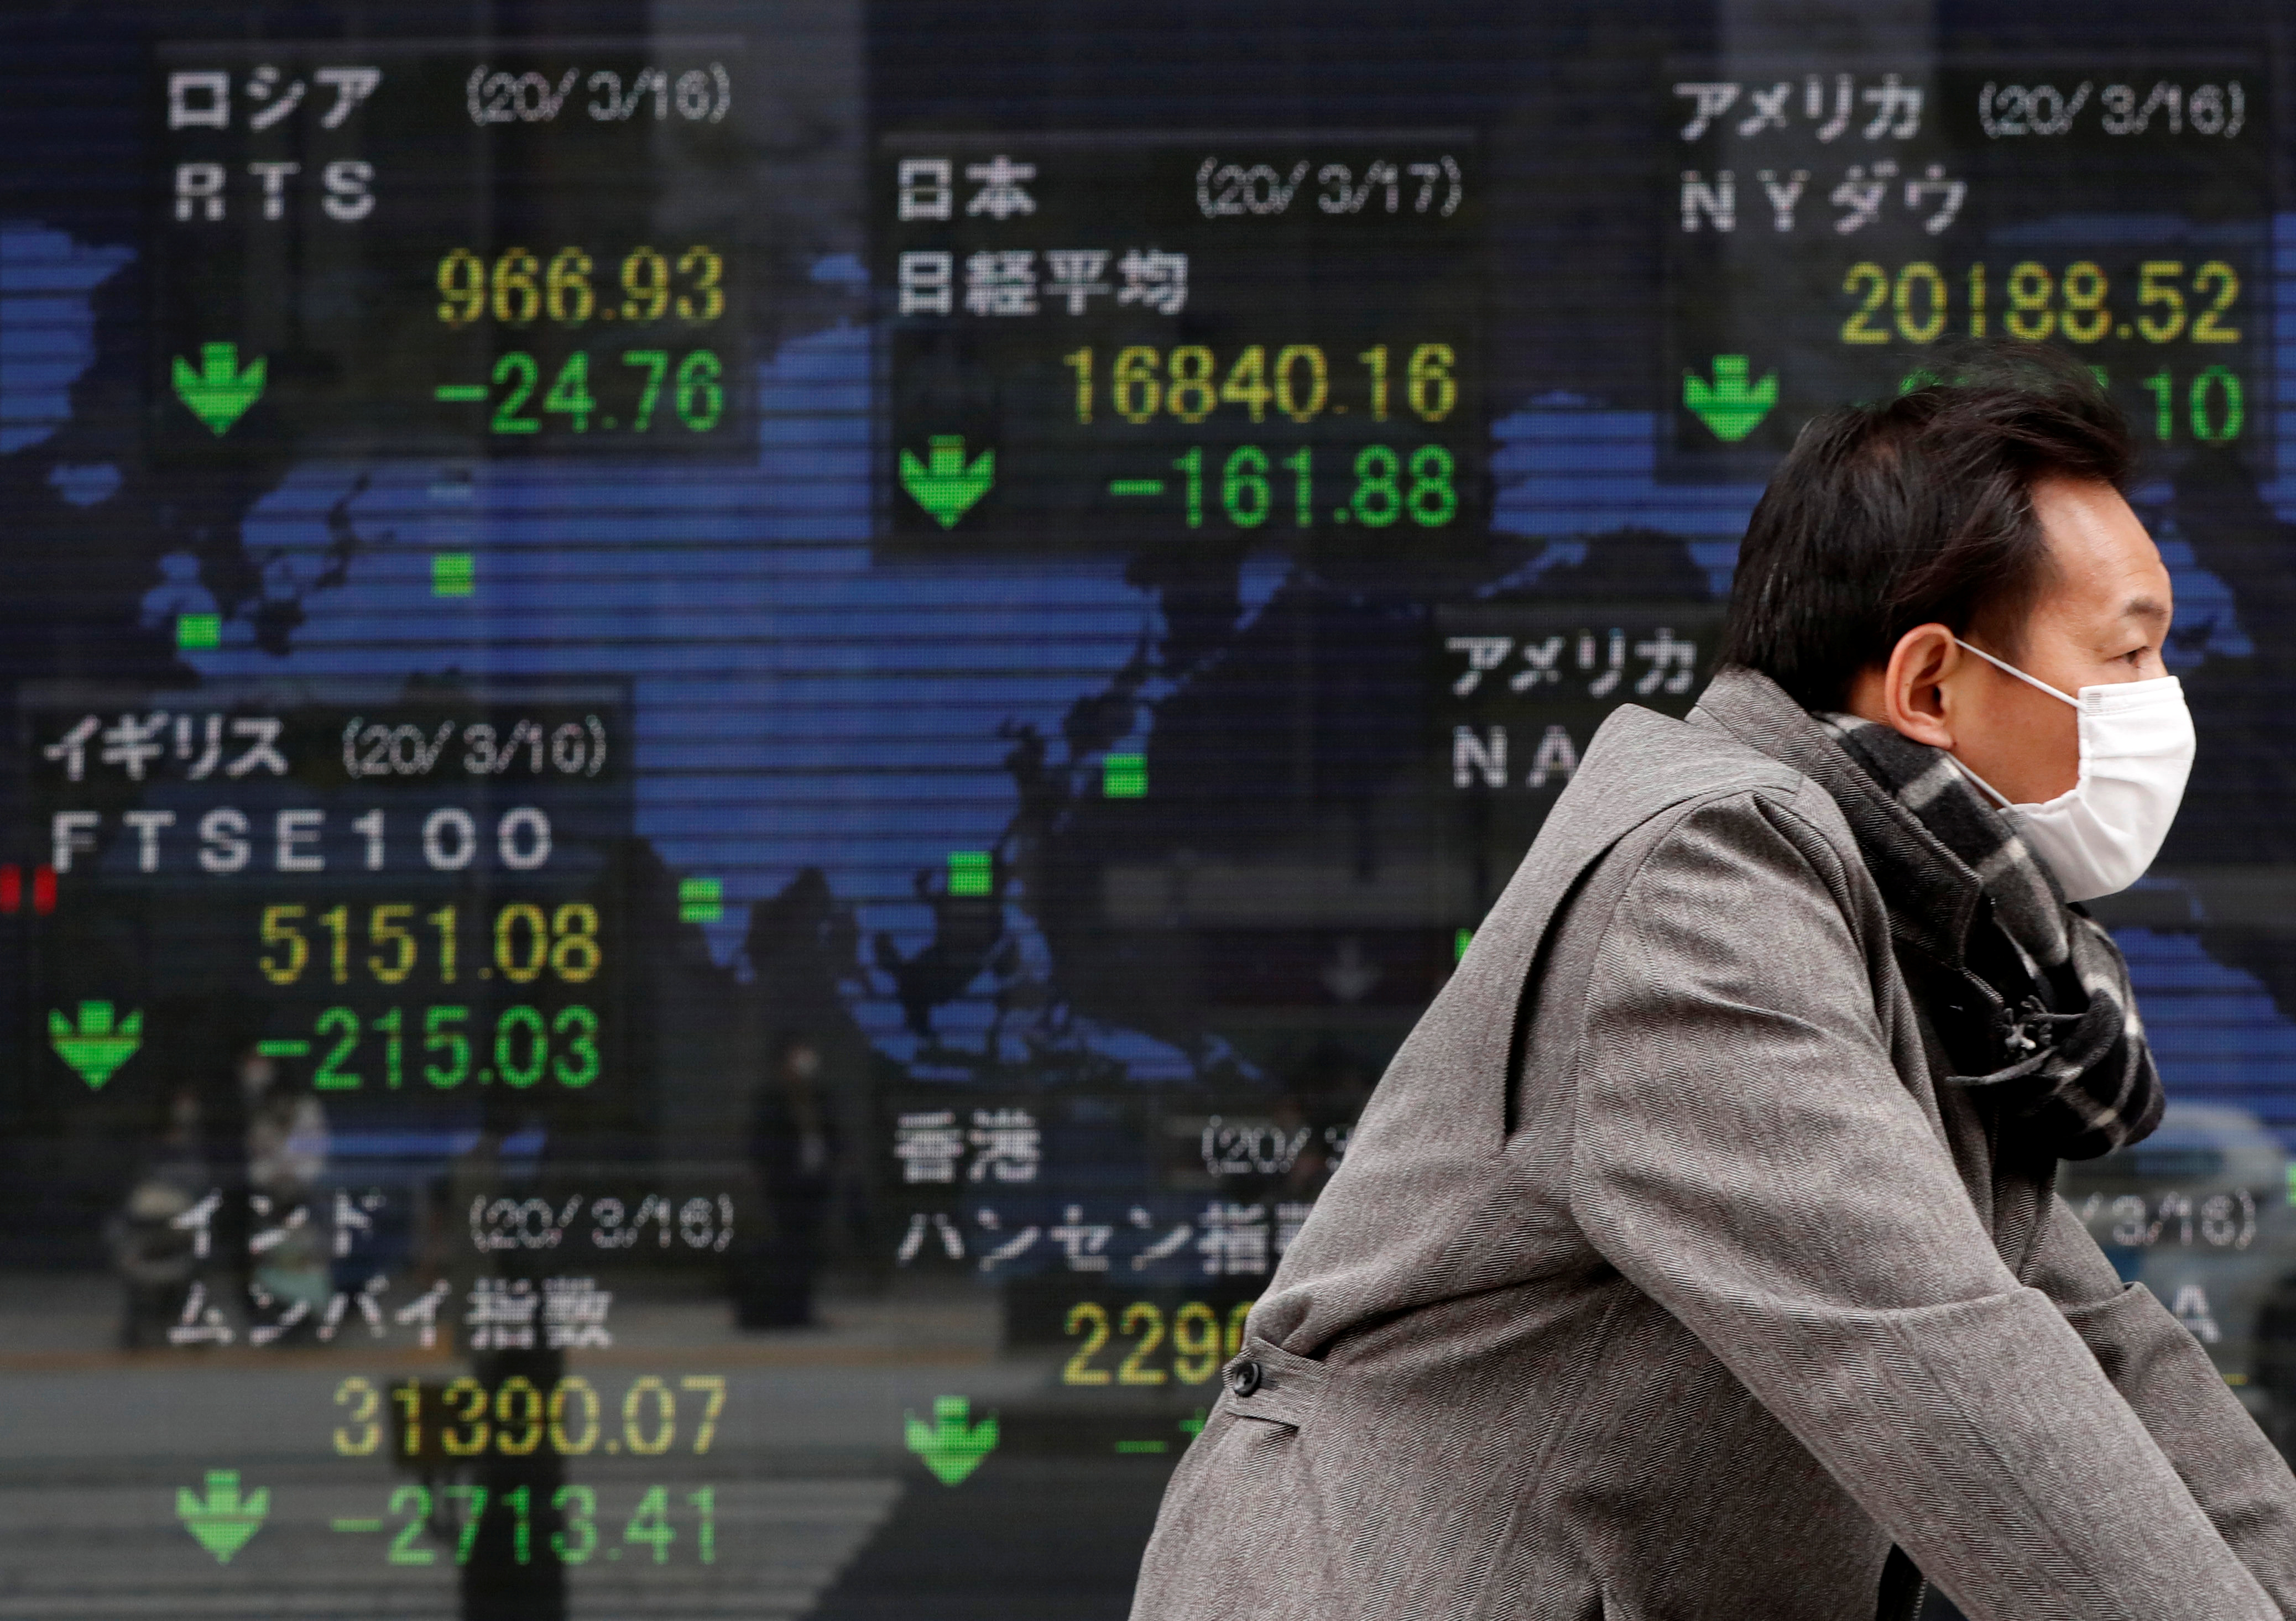 A man wearing a protective face mask following an outbreak of the coronavirus disease (COVID-19) walks past a screen displaying the world's markets indices outside a brokerage in Tokyo, Japan, March 17, 2020. REUTERS/Issei Kato